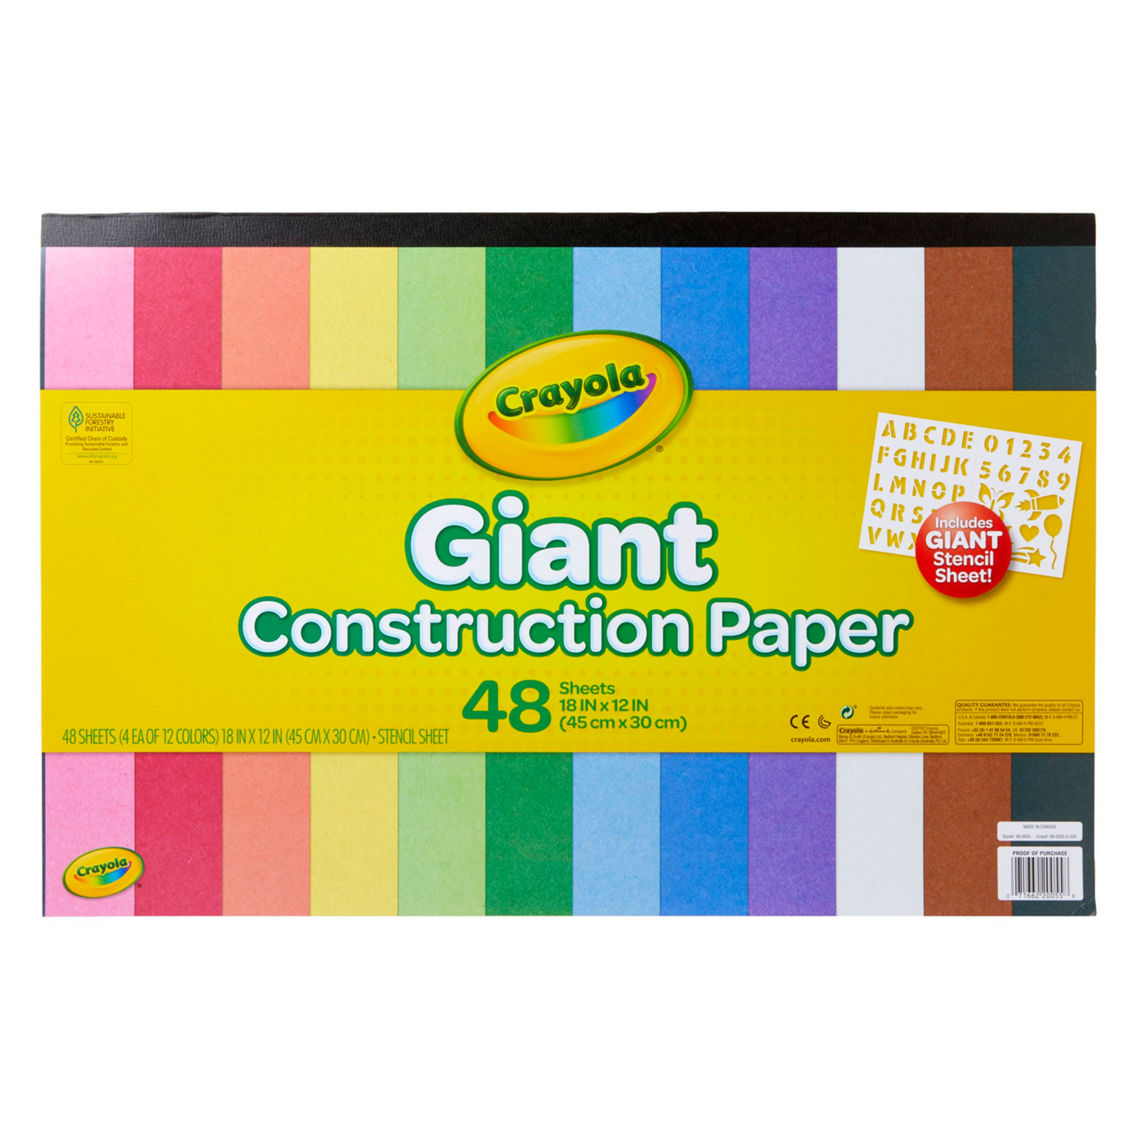 Crayola® Giant Construction Paper Pad with Stencils, 48 Sheets, Pack of 6 - Image 2 of 4